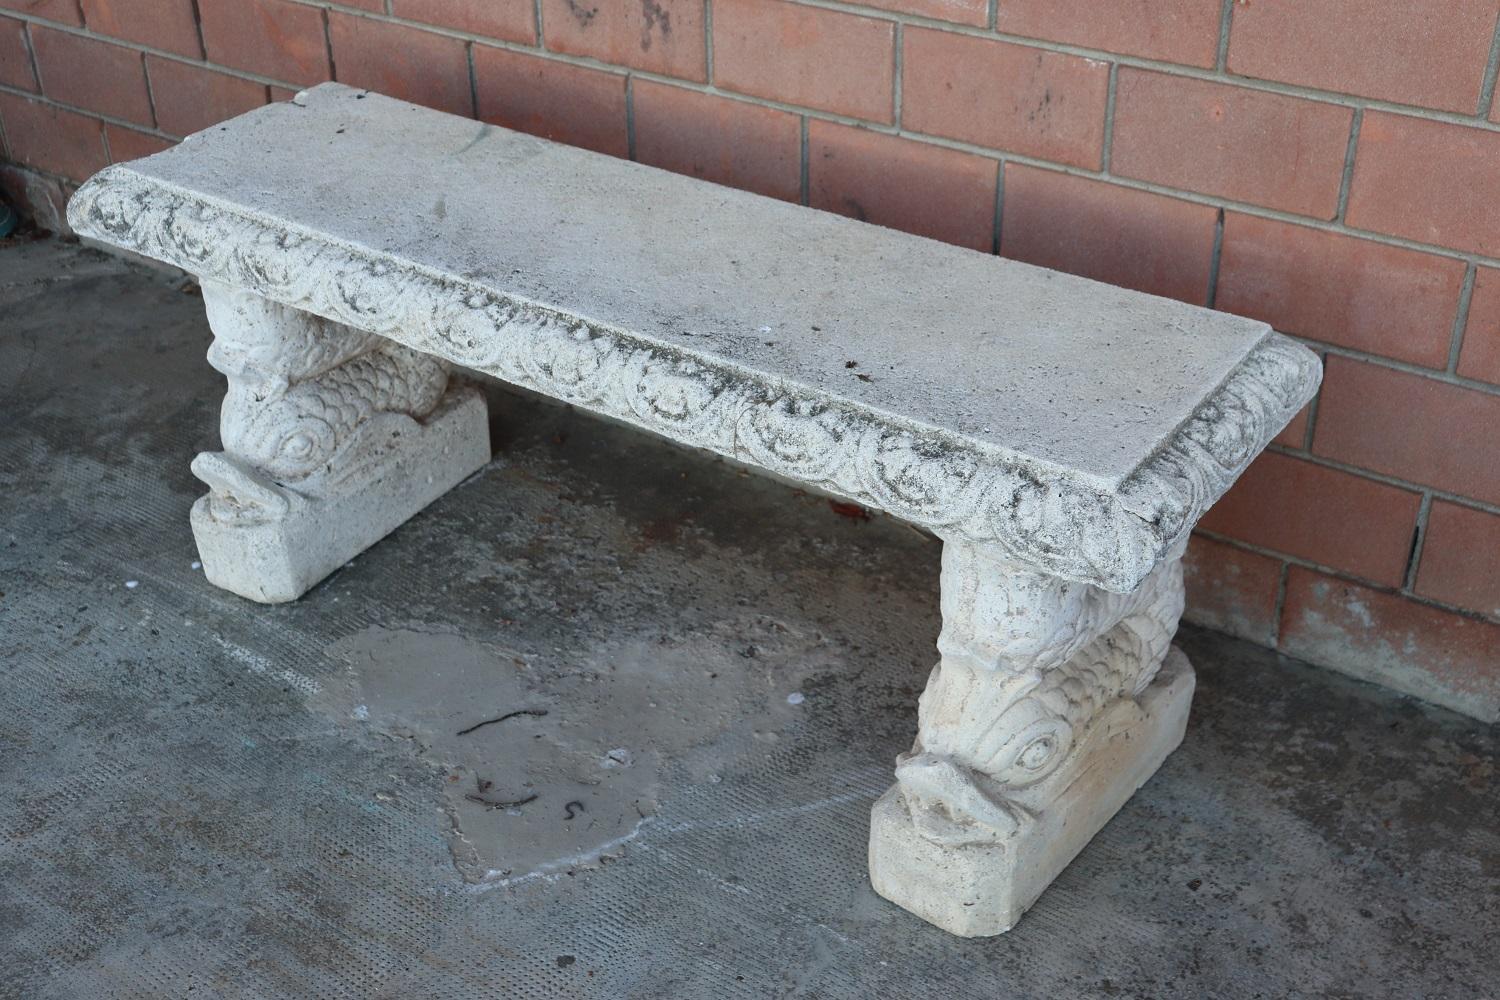 Beautiful refined garden ad outdoor bench. Beautiful and majestic in mixed material of concrete and stone. The bench has a refined classic decoration with large tritons supporting the seat of the bench. The bench shows signs of the passage of time.